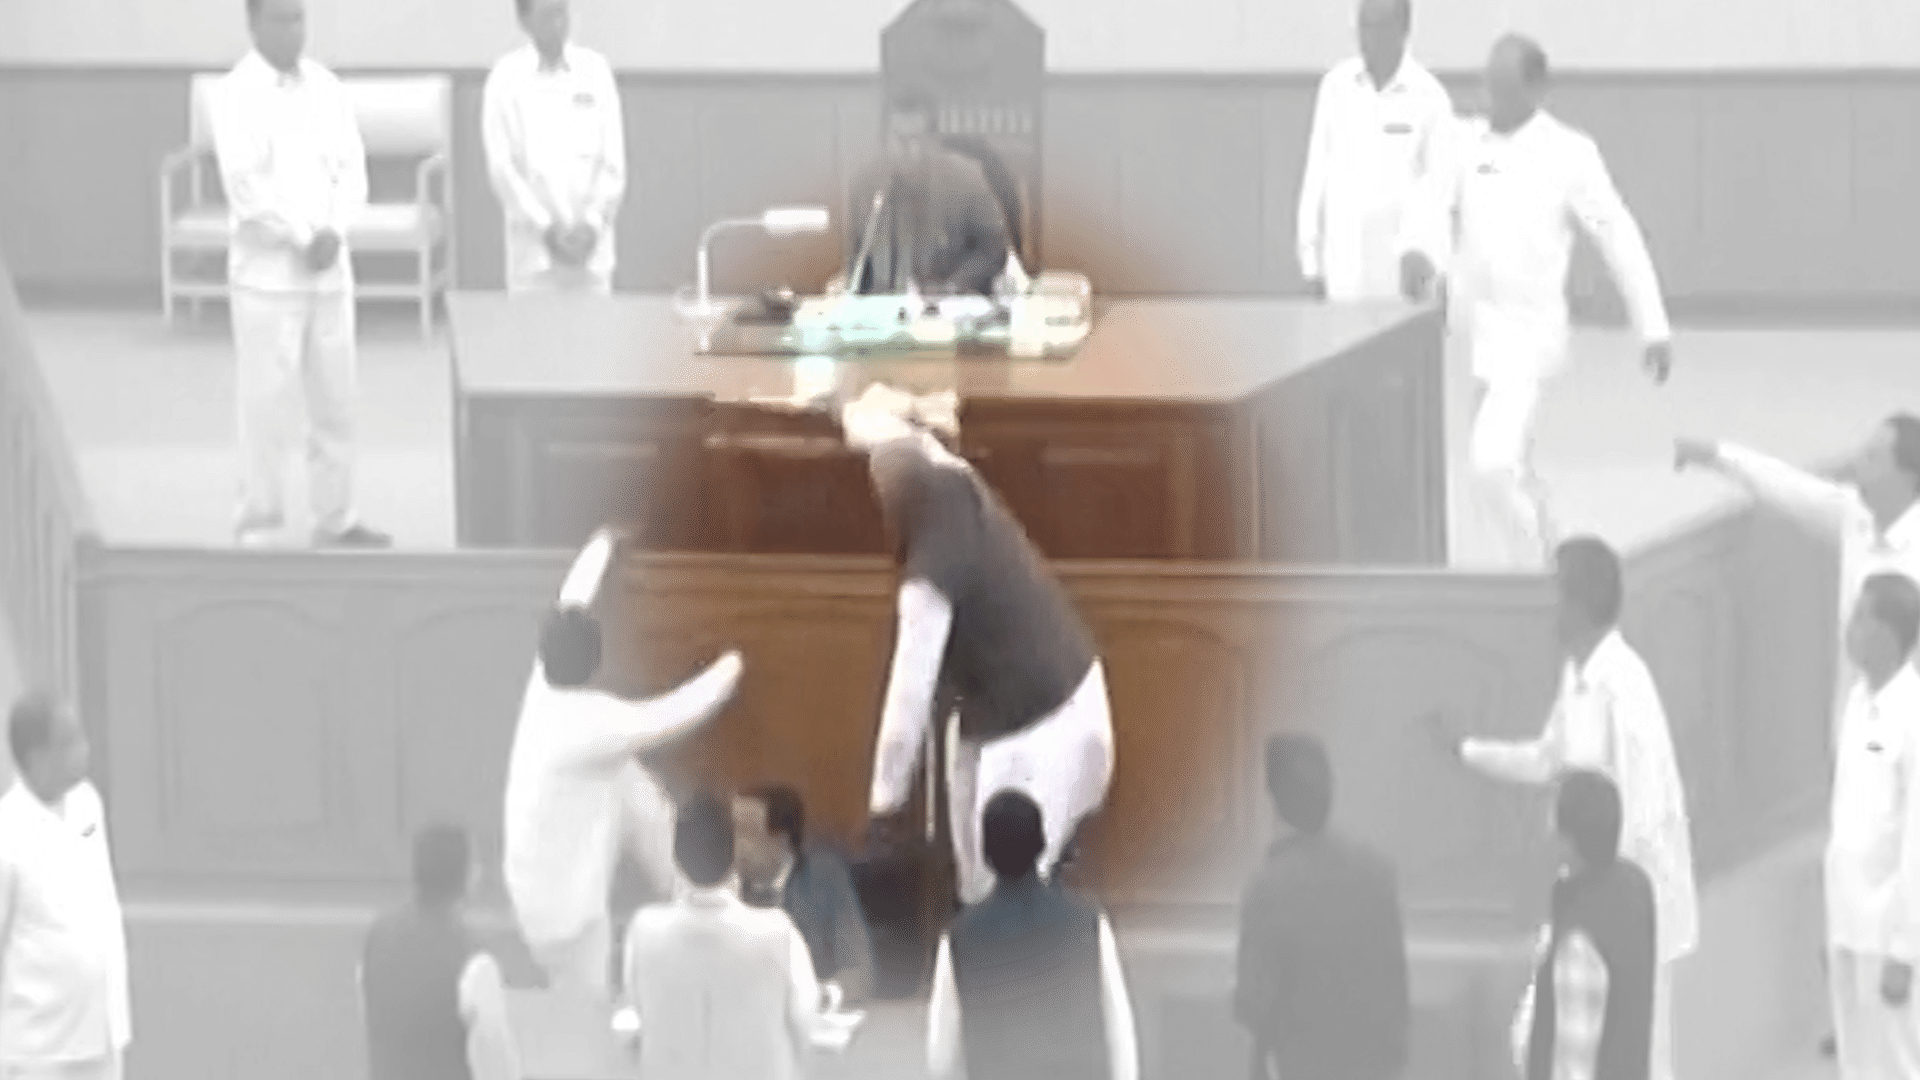 TMC MLA ran away with the Speaker’s mace. (Photo: ANI screengrab/altered by <b>The Quint</b>)